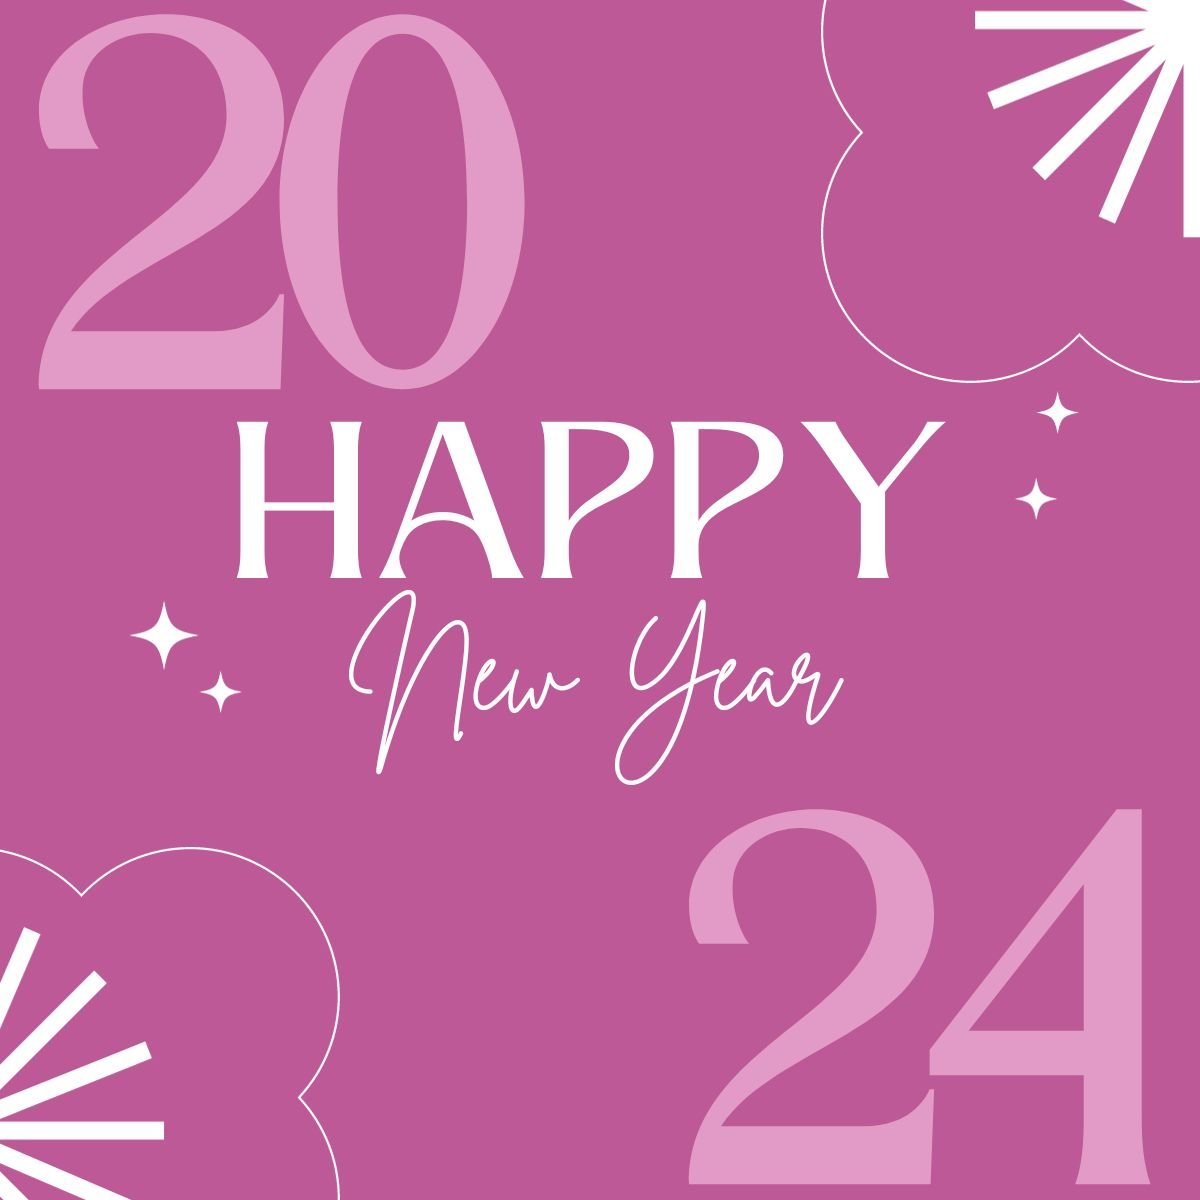 Happy New Year 2024 Greeting Card Image For Best Freind